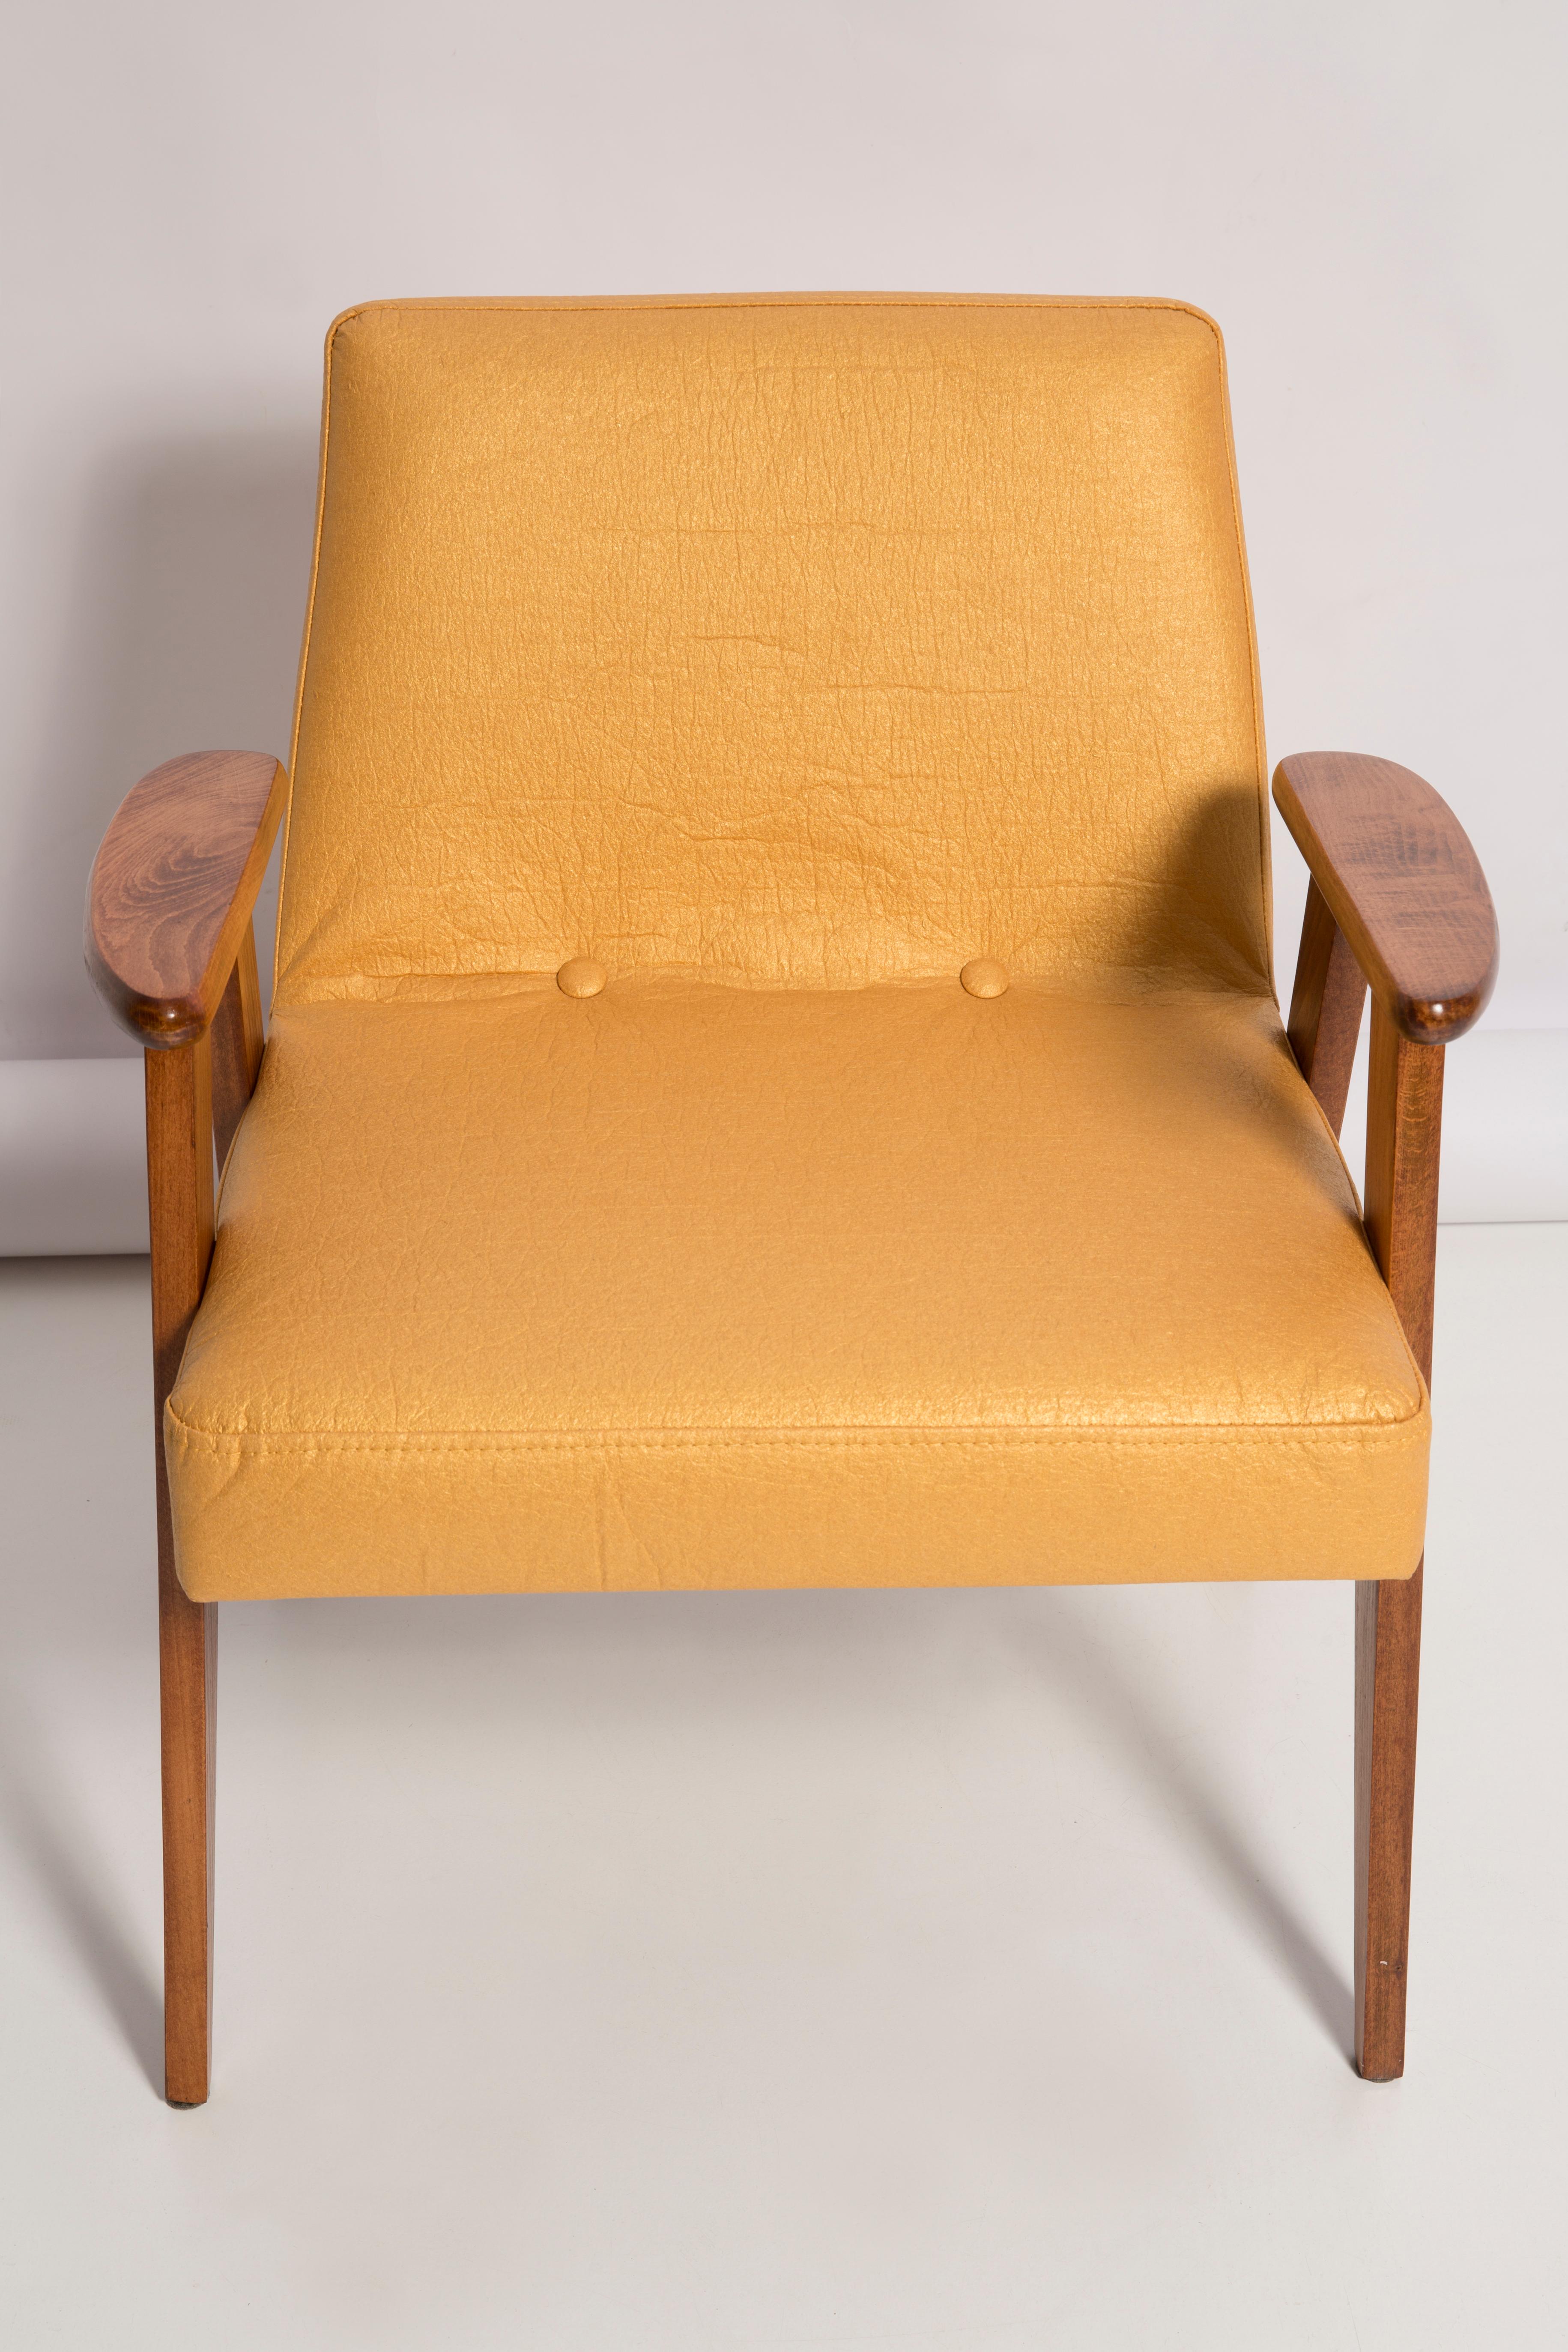 Midcentury 366 Club Armchair in Gold Pineapple Leather, Jozef Chierowski, 1960s For Sale 3